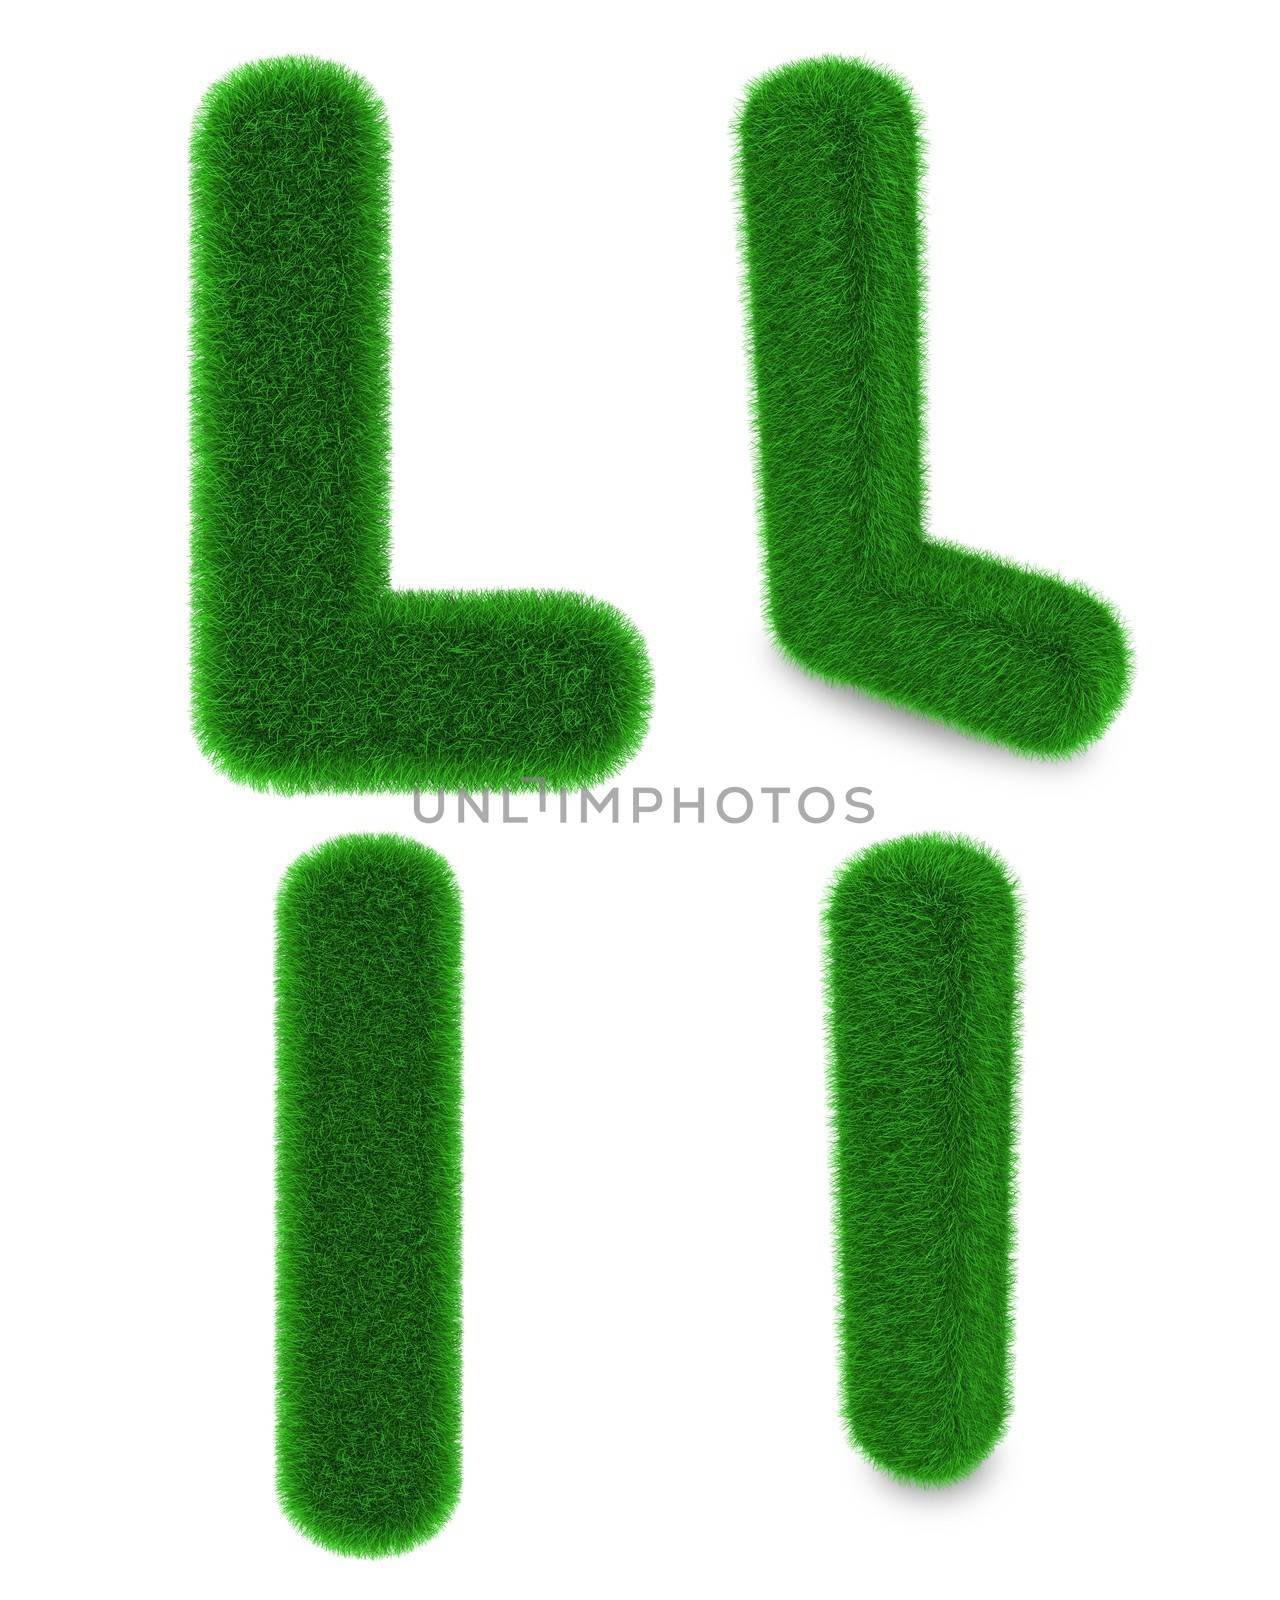 Letter L made of grass by Harvepino